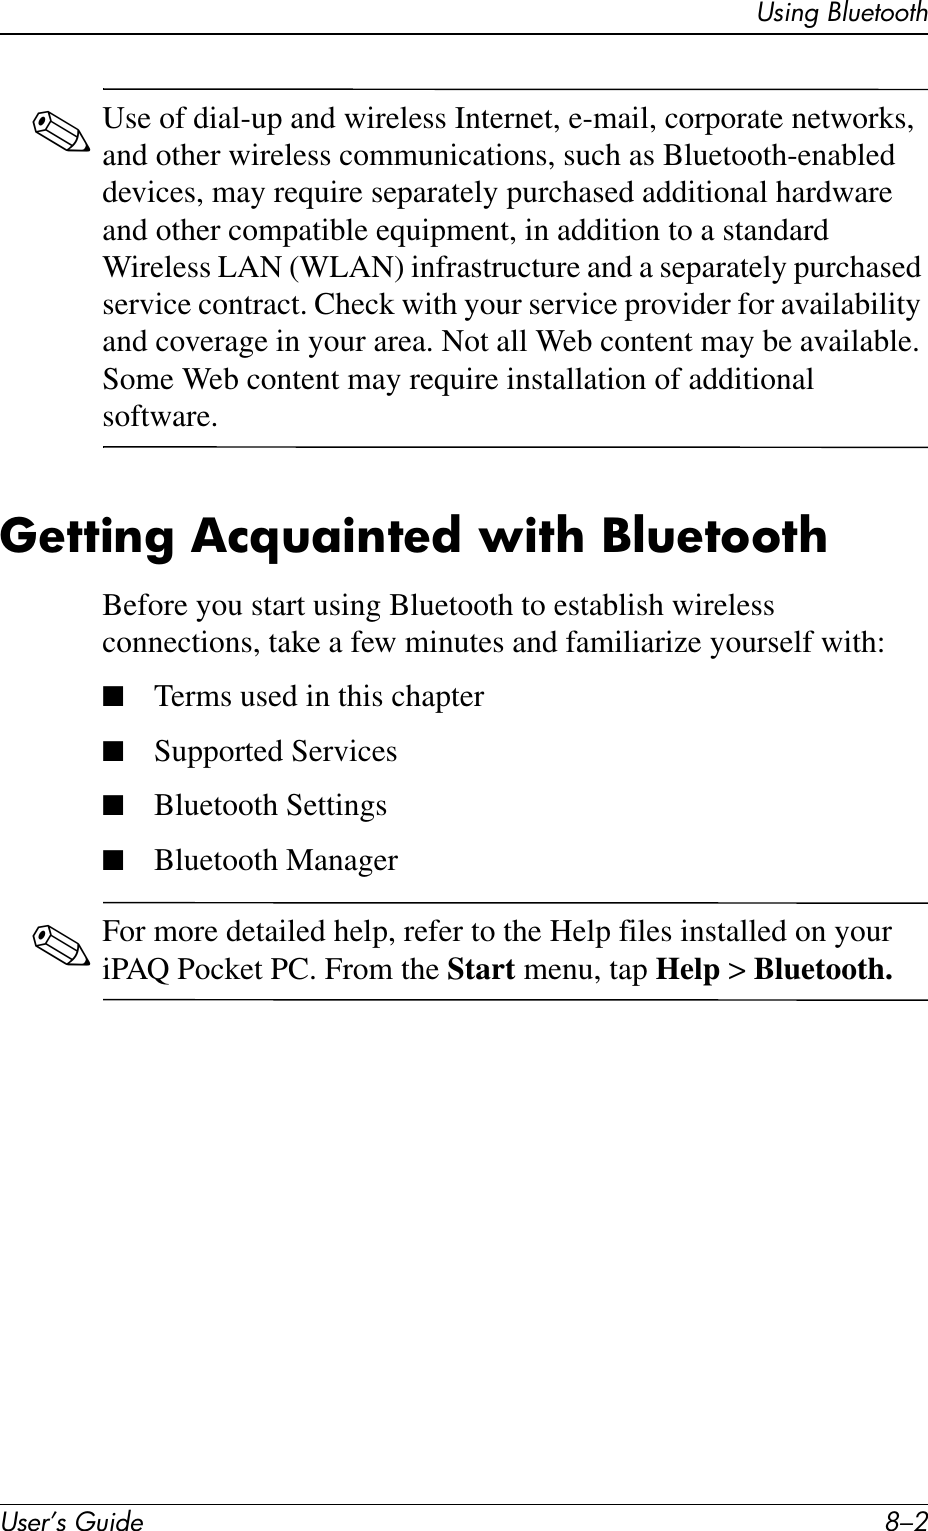 User’s Guide 8–2Using Bluetooth✎Use of dial-up and wireless Internet, e-mail, corporate networks, and other wireless communications, such as Bluetooth-enabled devices, may require separately purchased additional hardware and other compatible equipment, in addition to a standard Wireless LAN (WLAN) infrastructure and a separately purchased service contract. Check with your service provider for availability and coverage in your area. Not all Web content may be available. Some Web content may require installation of additional software.Getting Acquainted with BluetoothBefore you start using Bluetooth to establish wireless connections, take a few minutes and familiarize yourself with:■Terms used in this chapter■Supported Services■Bluetooth Settings■Bluetooth Manager✎For more detailed help, refer to the Help files installed on your iPAQ Pocket PC. From the Start menu, tap Help &gt; Bluetooth.